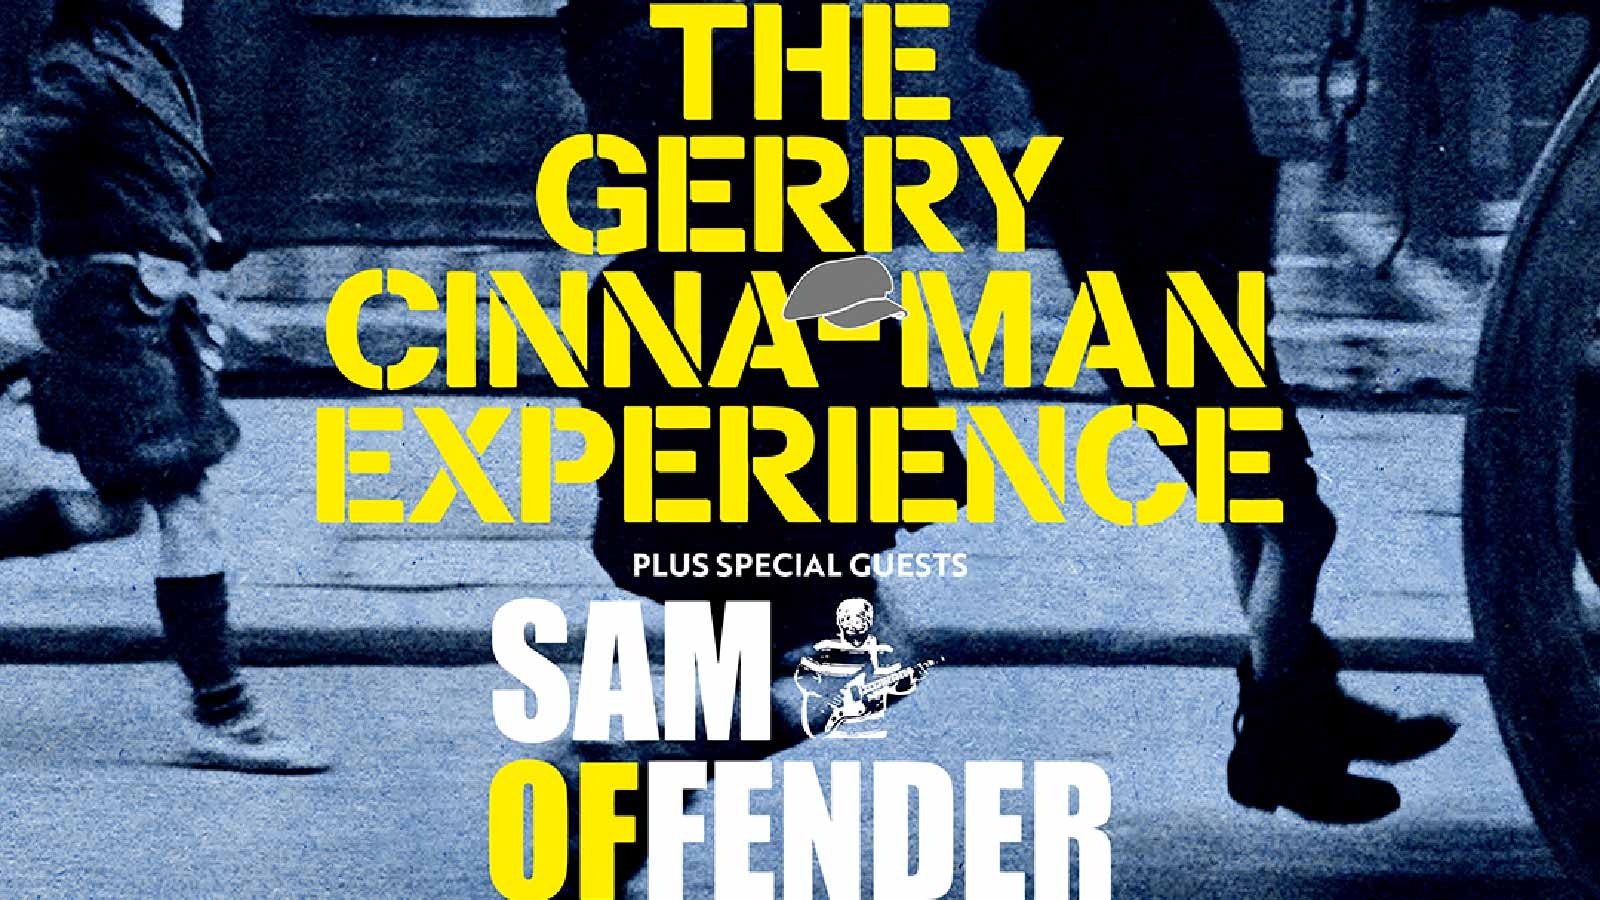 The Gerry Cinna-man Experience (with support from Sam Offender)